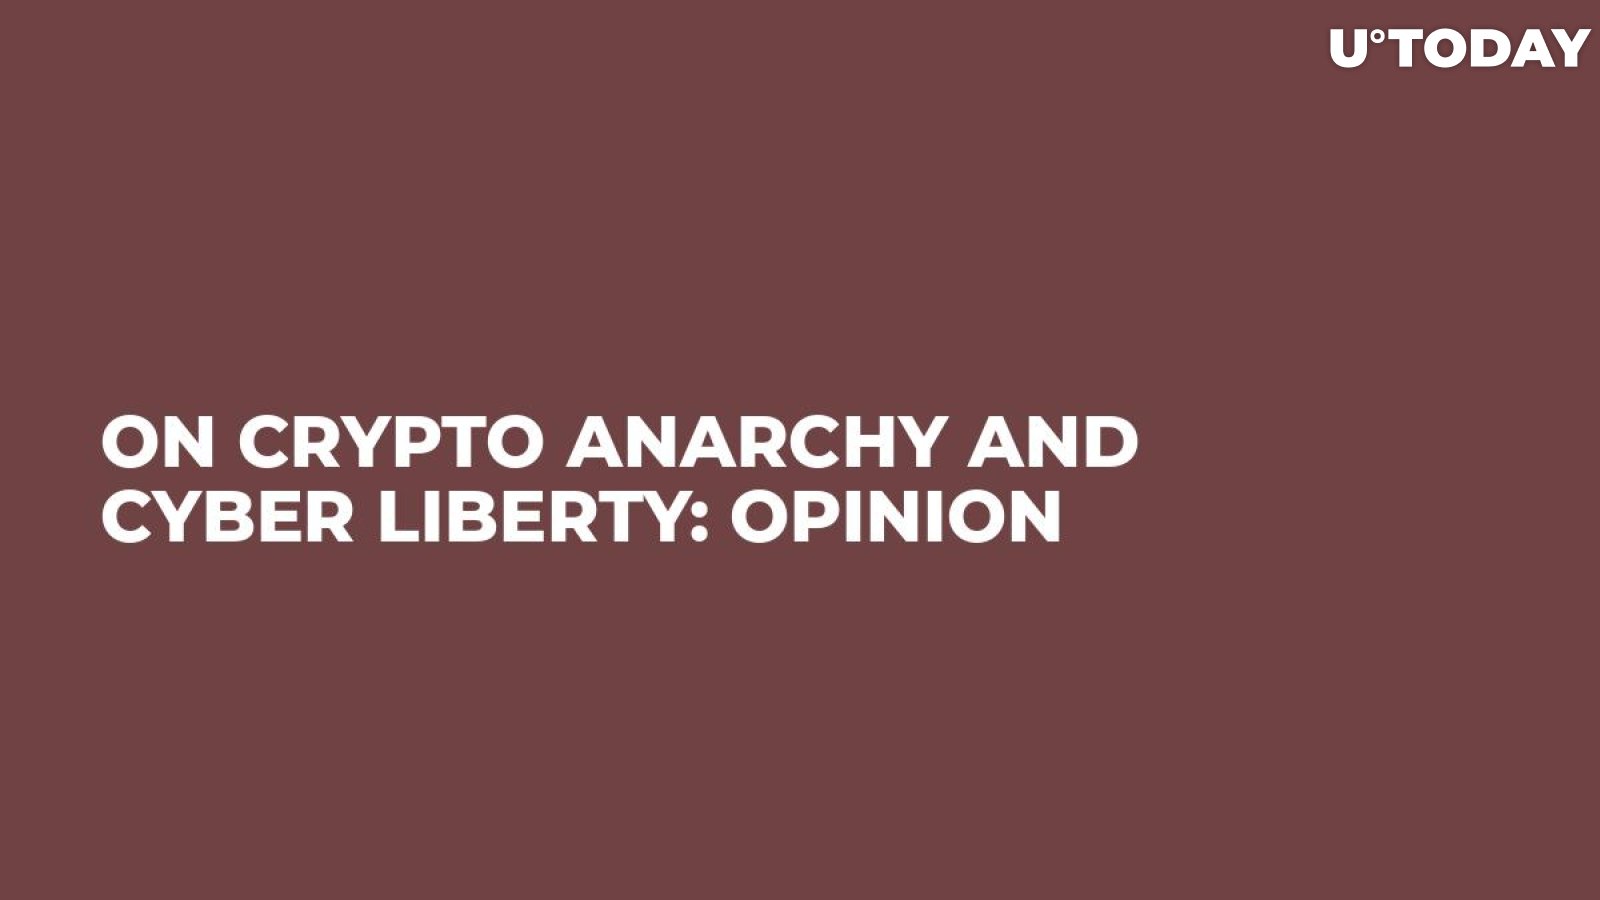 On Crypto Anarchy and Cyber Liberty: Opinion